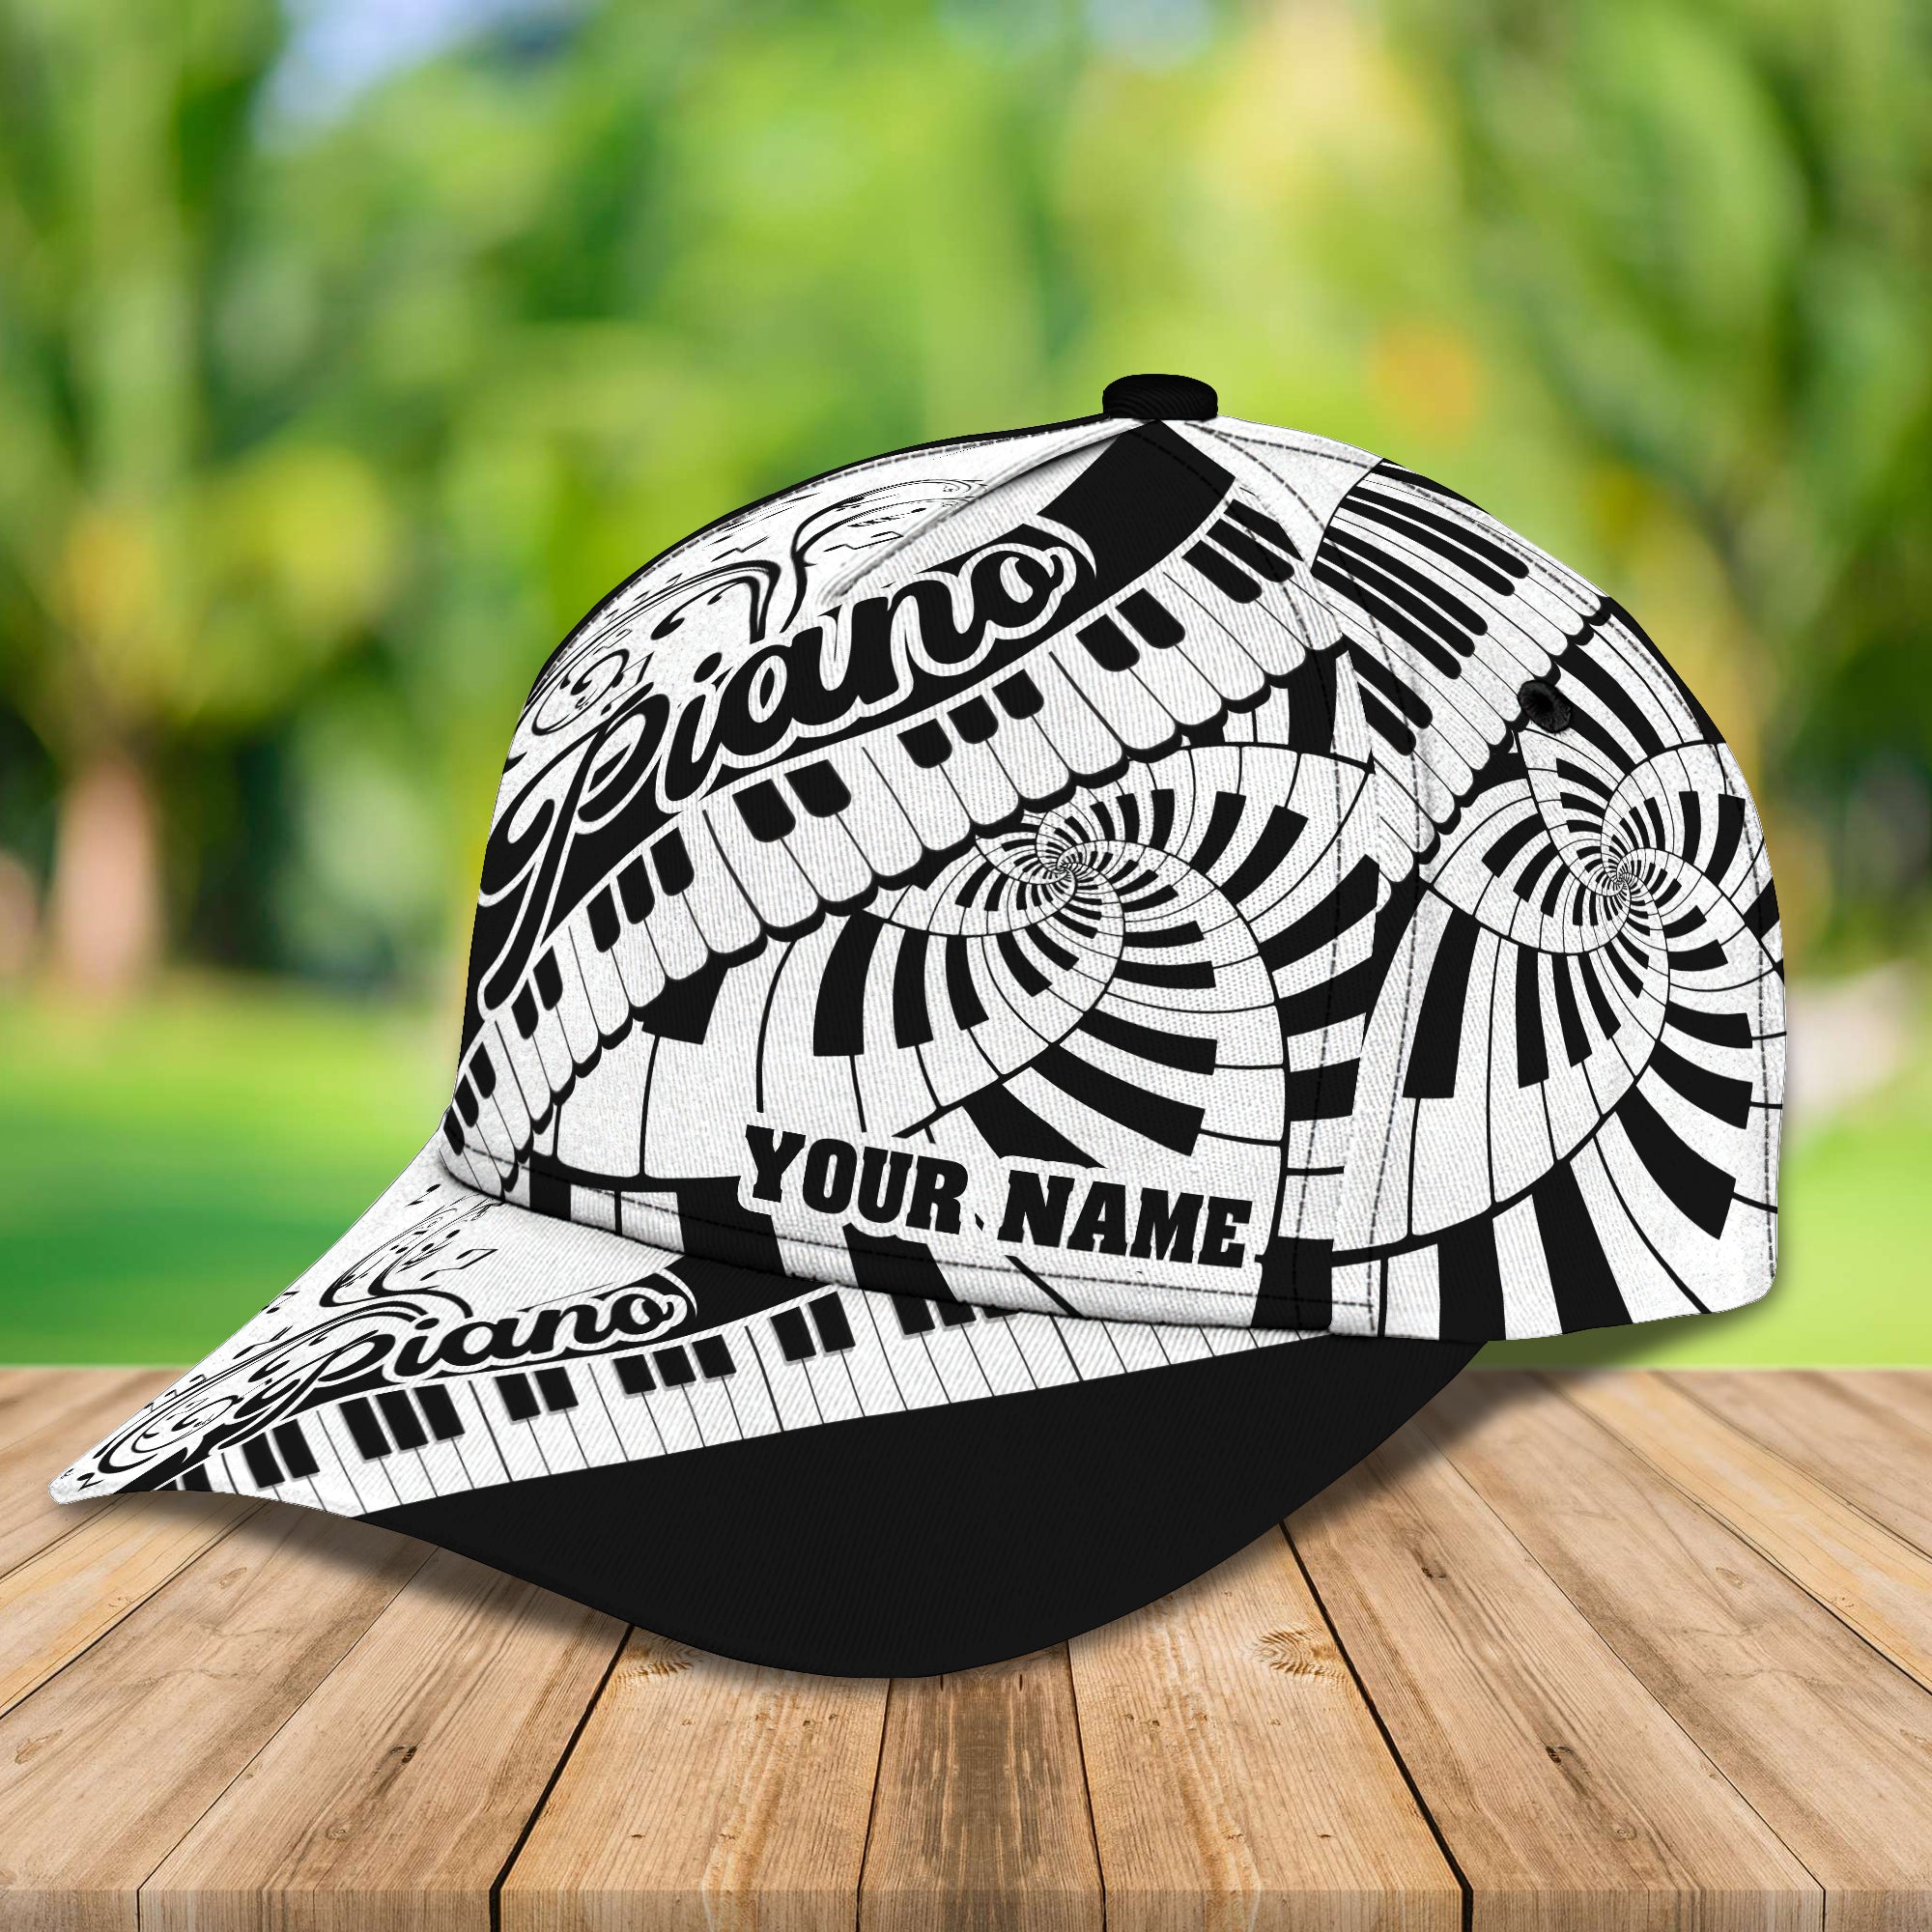 Piano - Personalized Name Cap - tra96